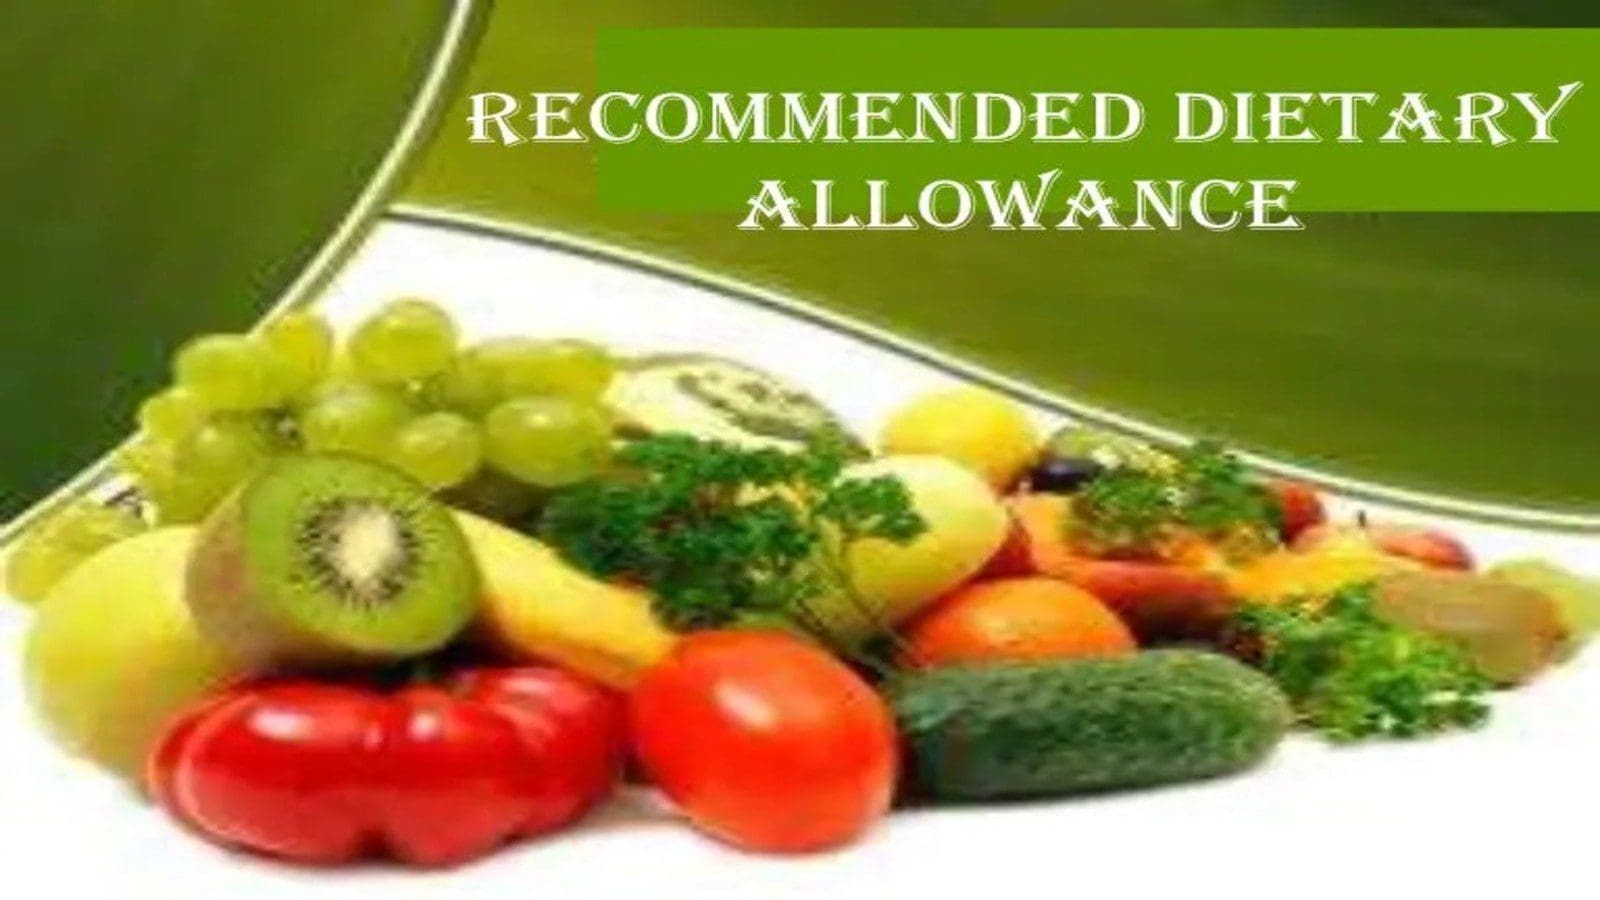 FSSAI issues directions on Recommended Dietary Allowance for food businesses